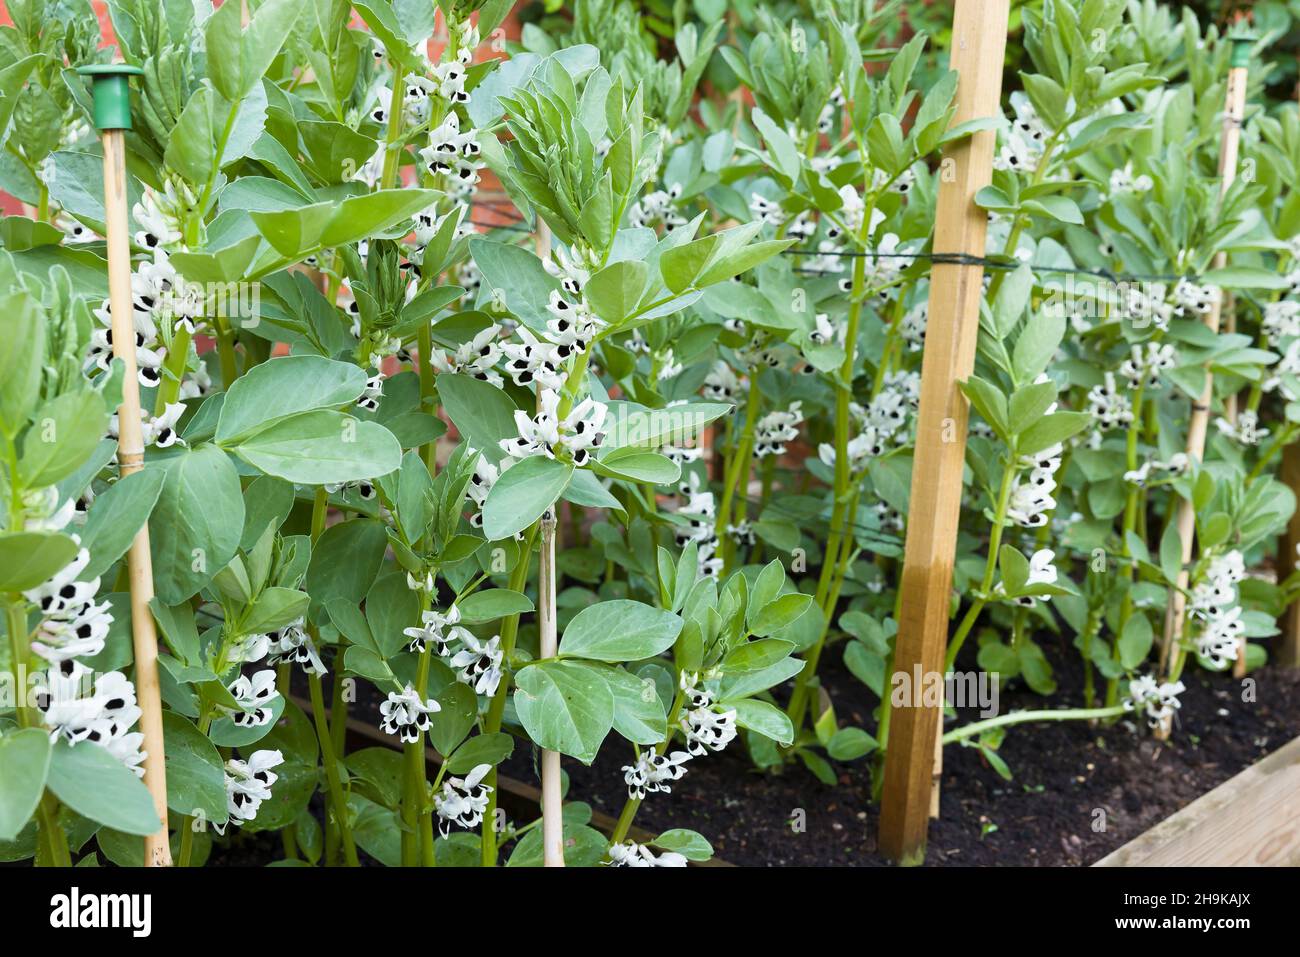 Closeup of broad beans (fava beans) plants growing with flowers Stock Photo